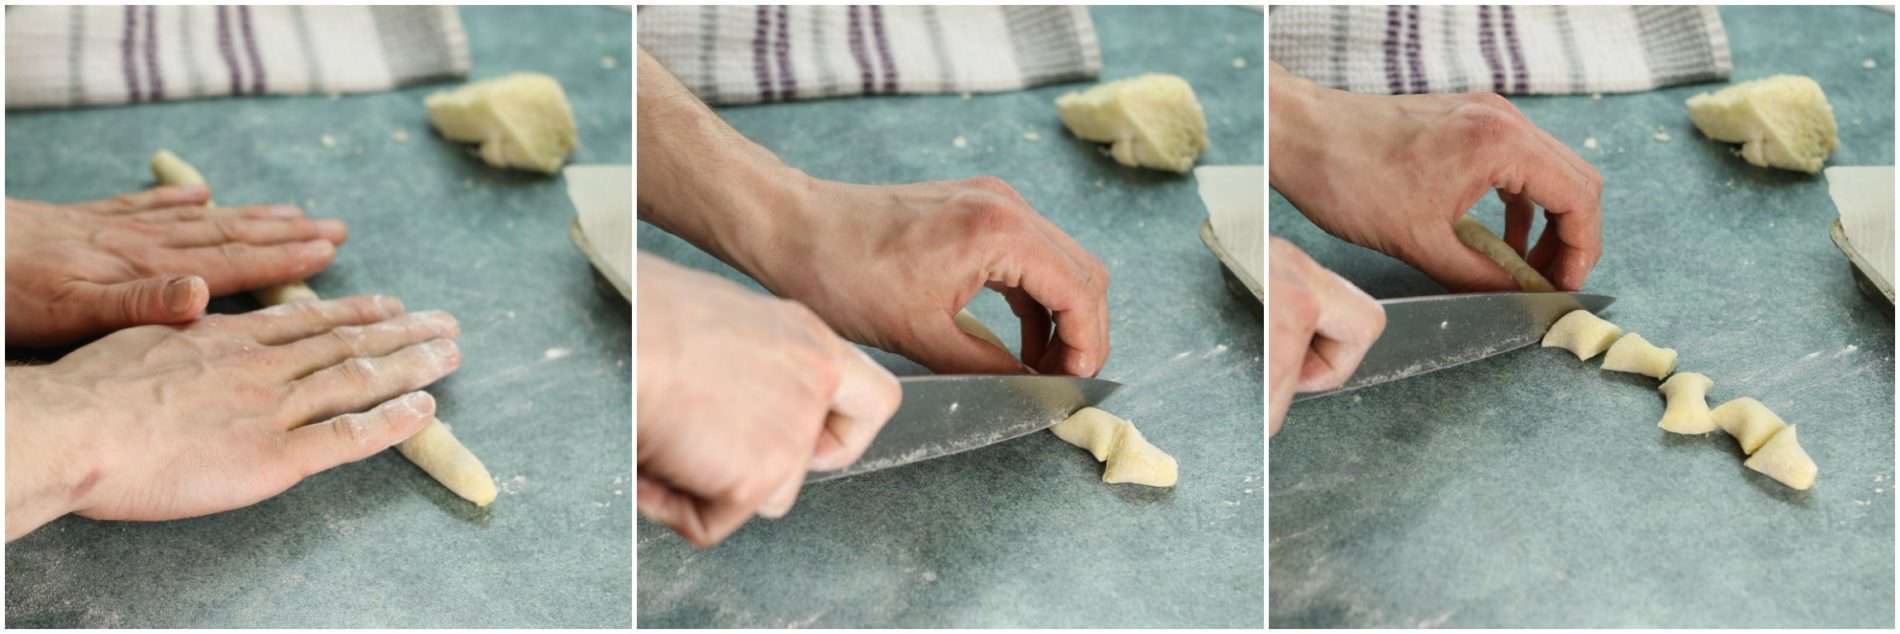 Rolling gnocchi is easy and fun! A great way to make pasta at home.